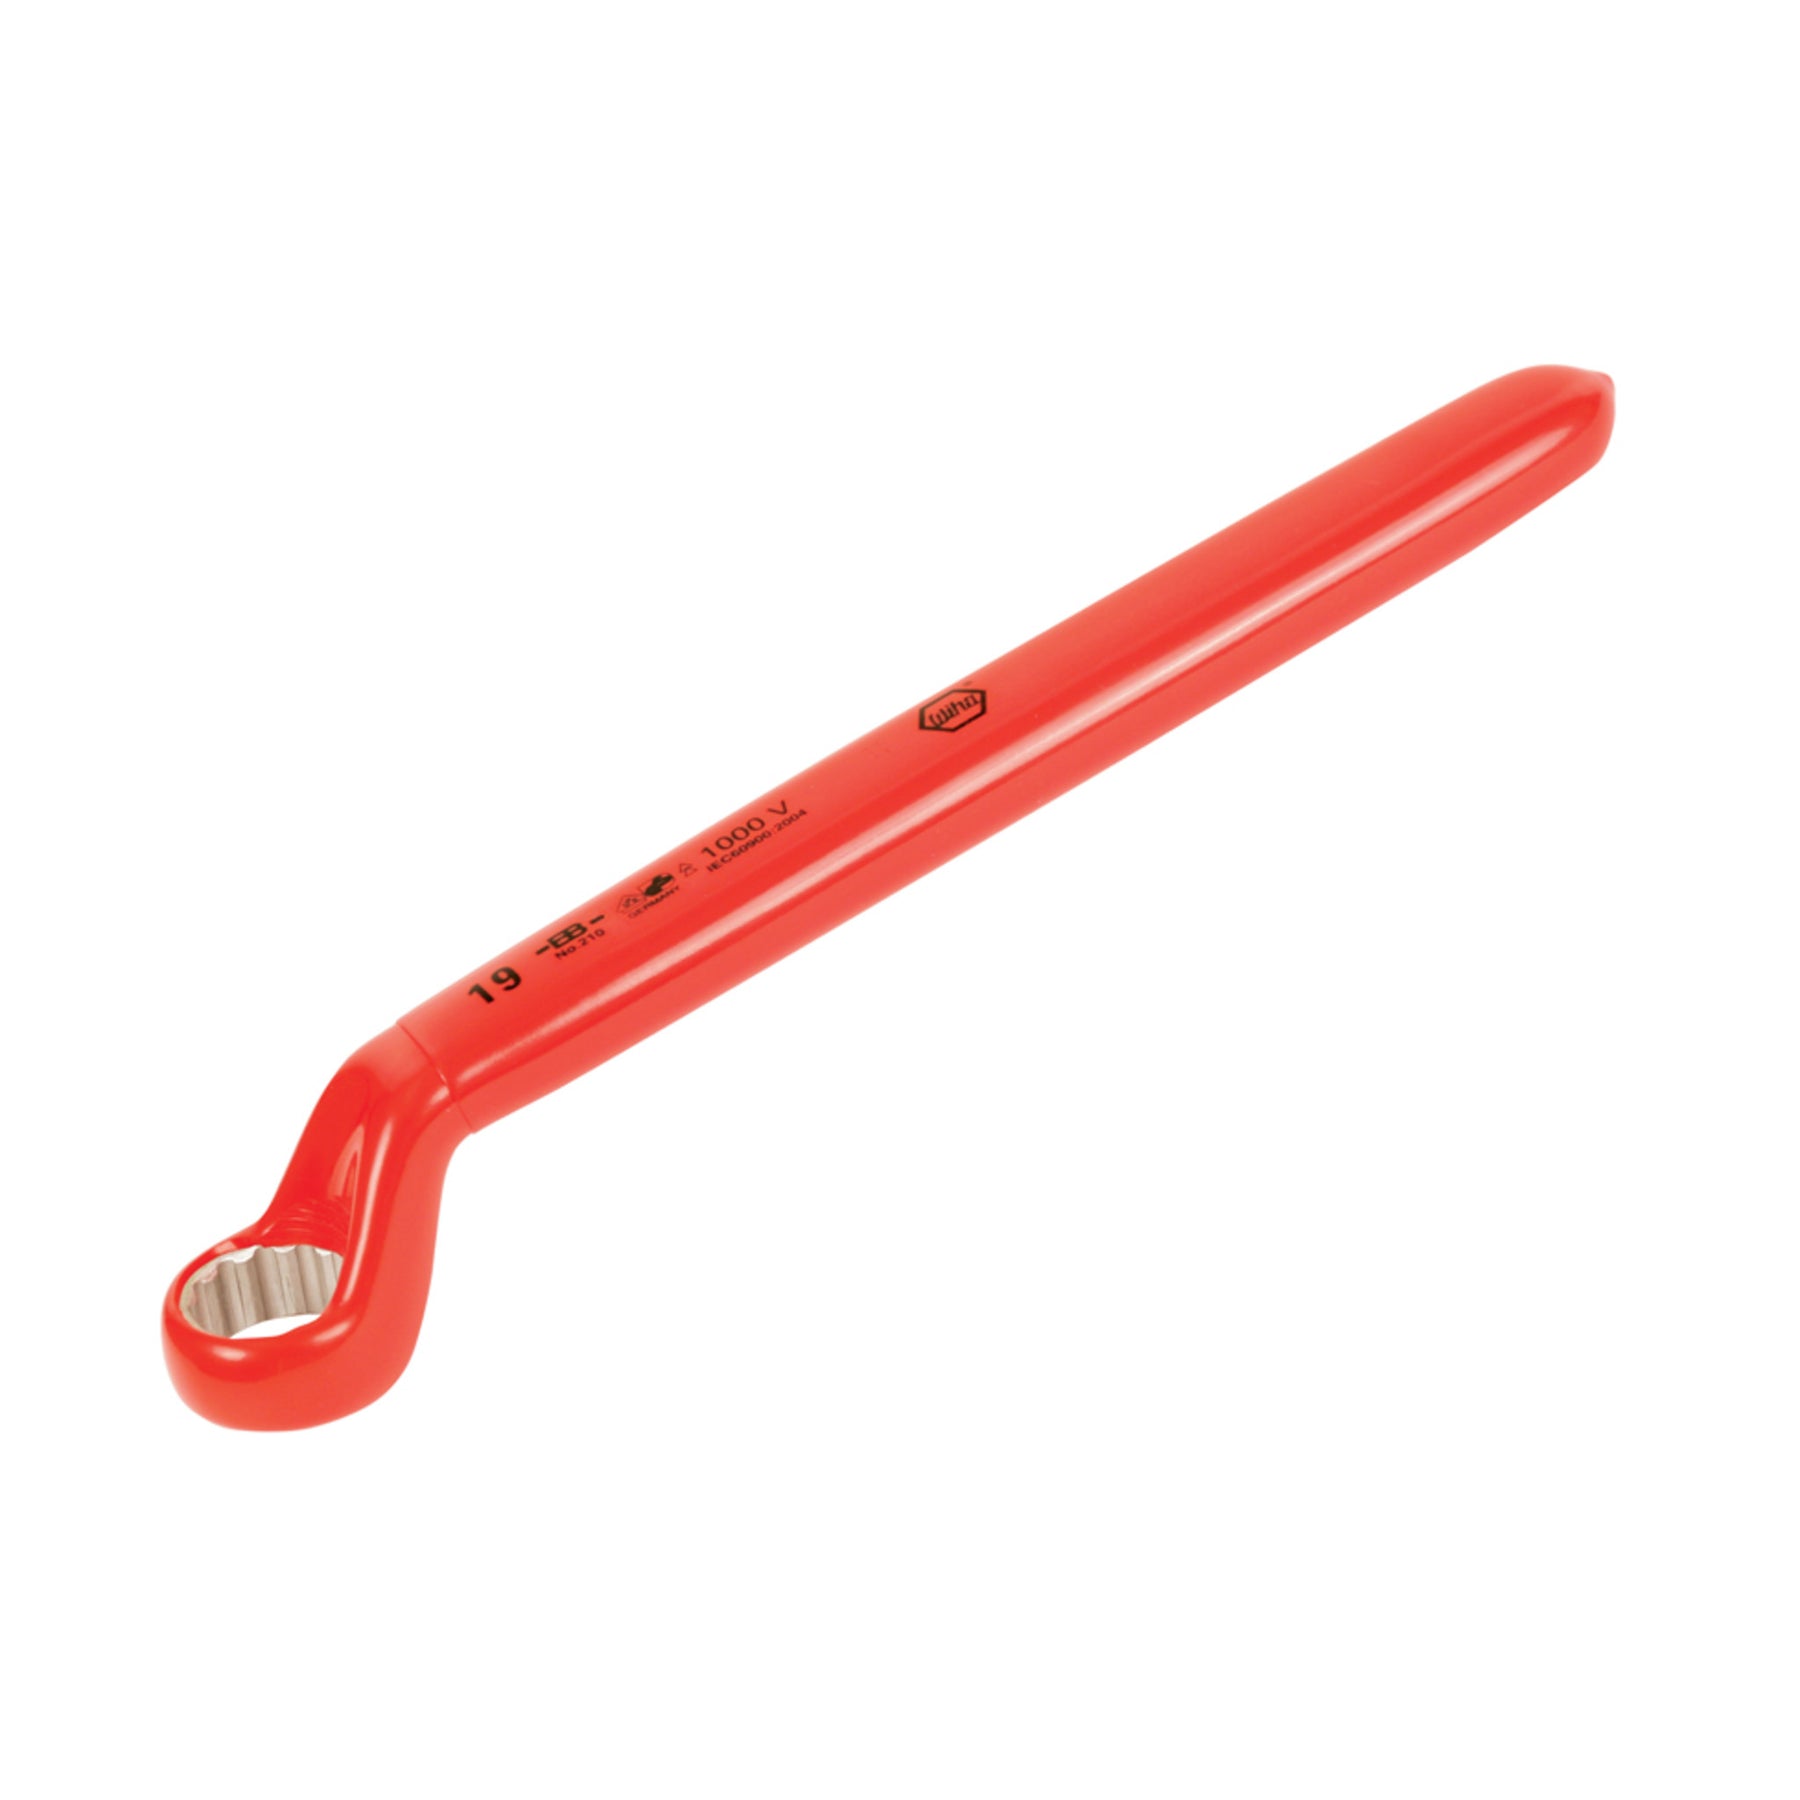 Insulated Deep Offset Wrench 20mm